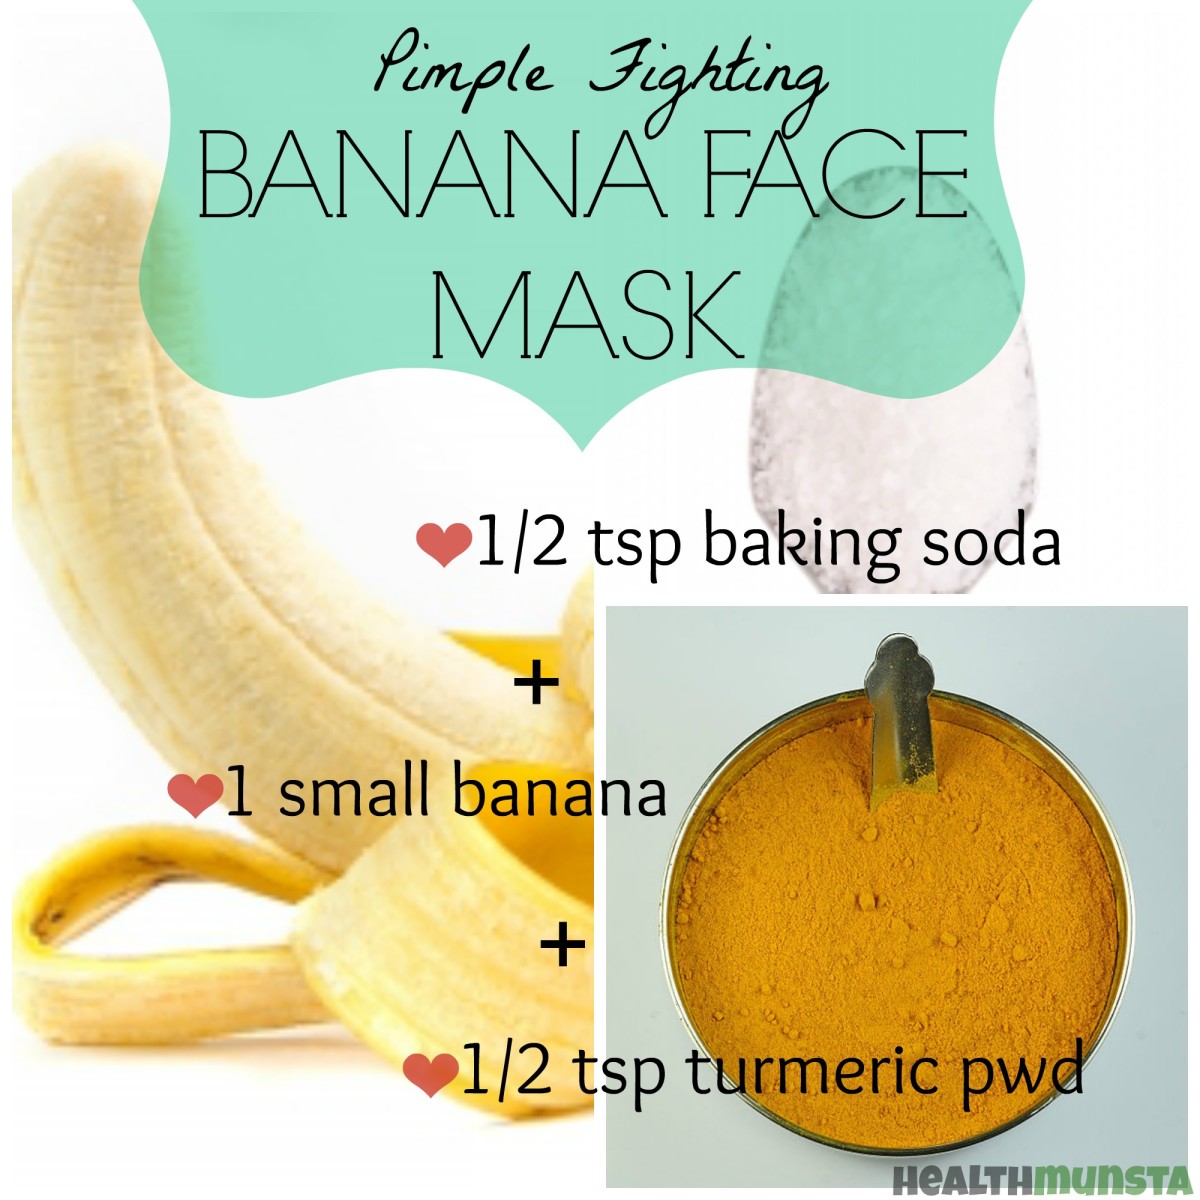 This easy banana face mask uses turmeric and baking soda to help you get glowing skin and reduce pimples and blemishes. Stay acne-free with regular application.